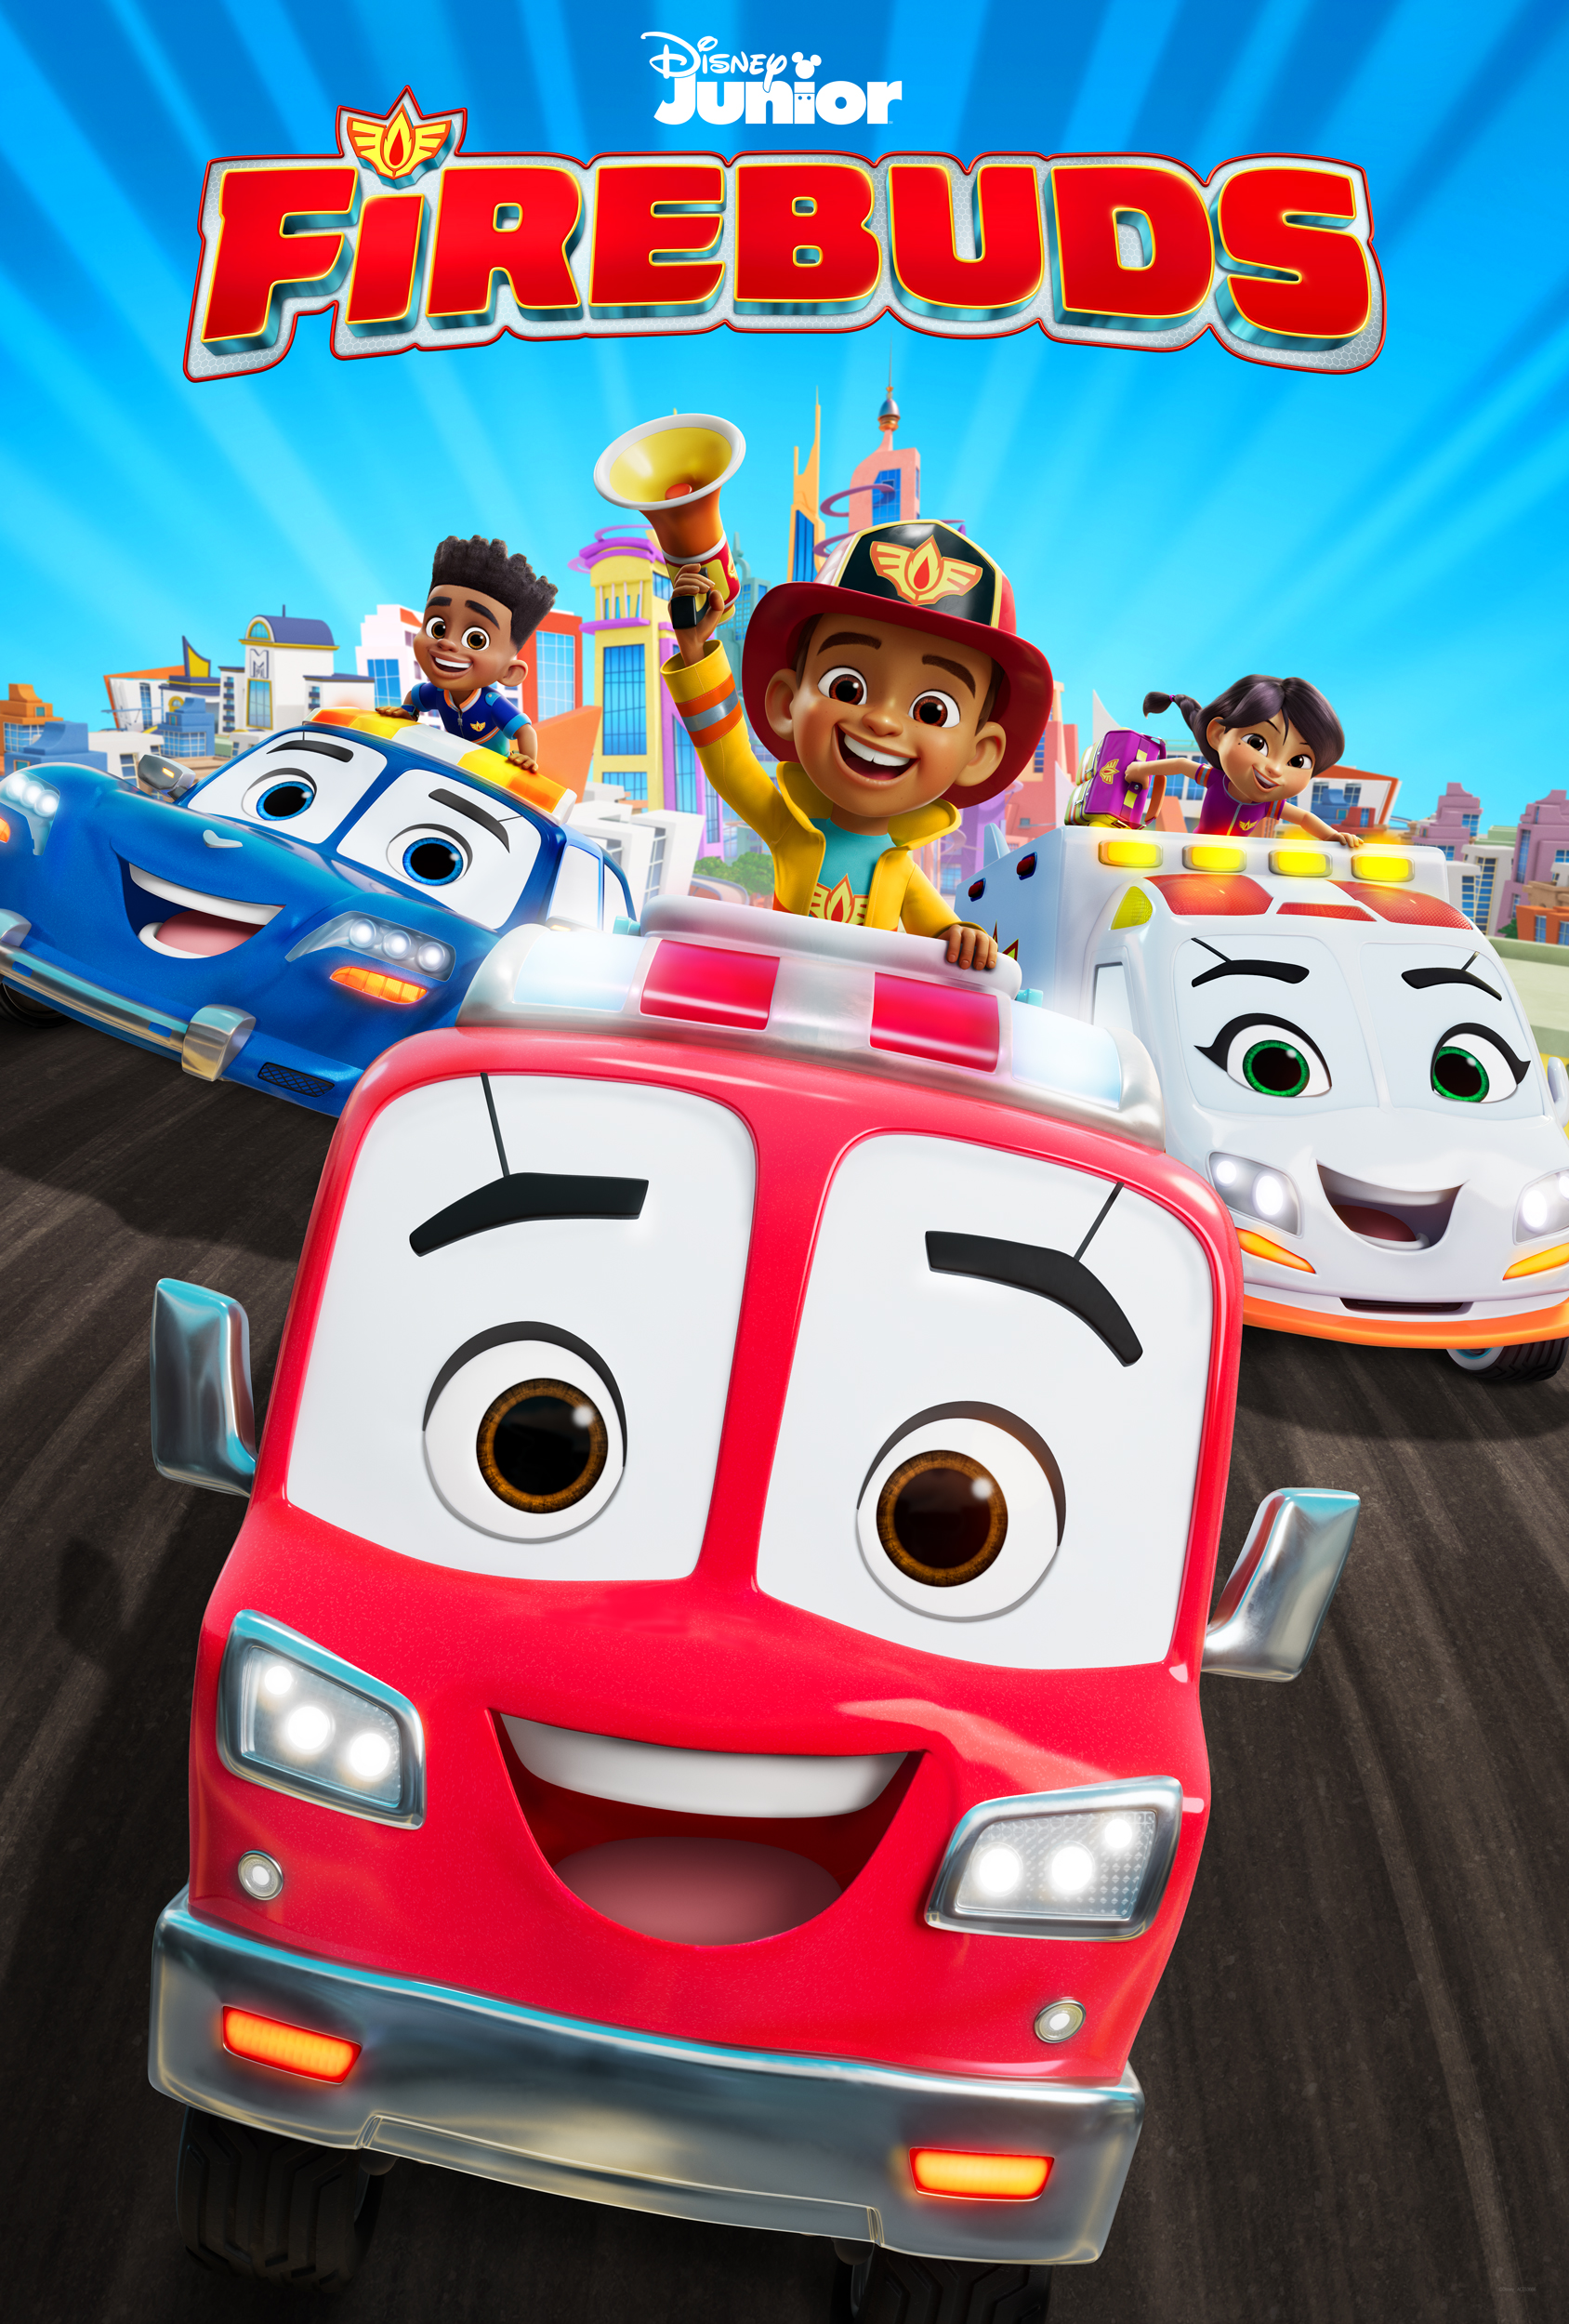 Cartoon children riding on emergency vehicles in a poster for Firebuds